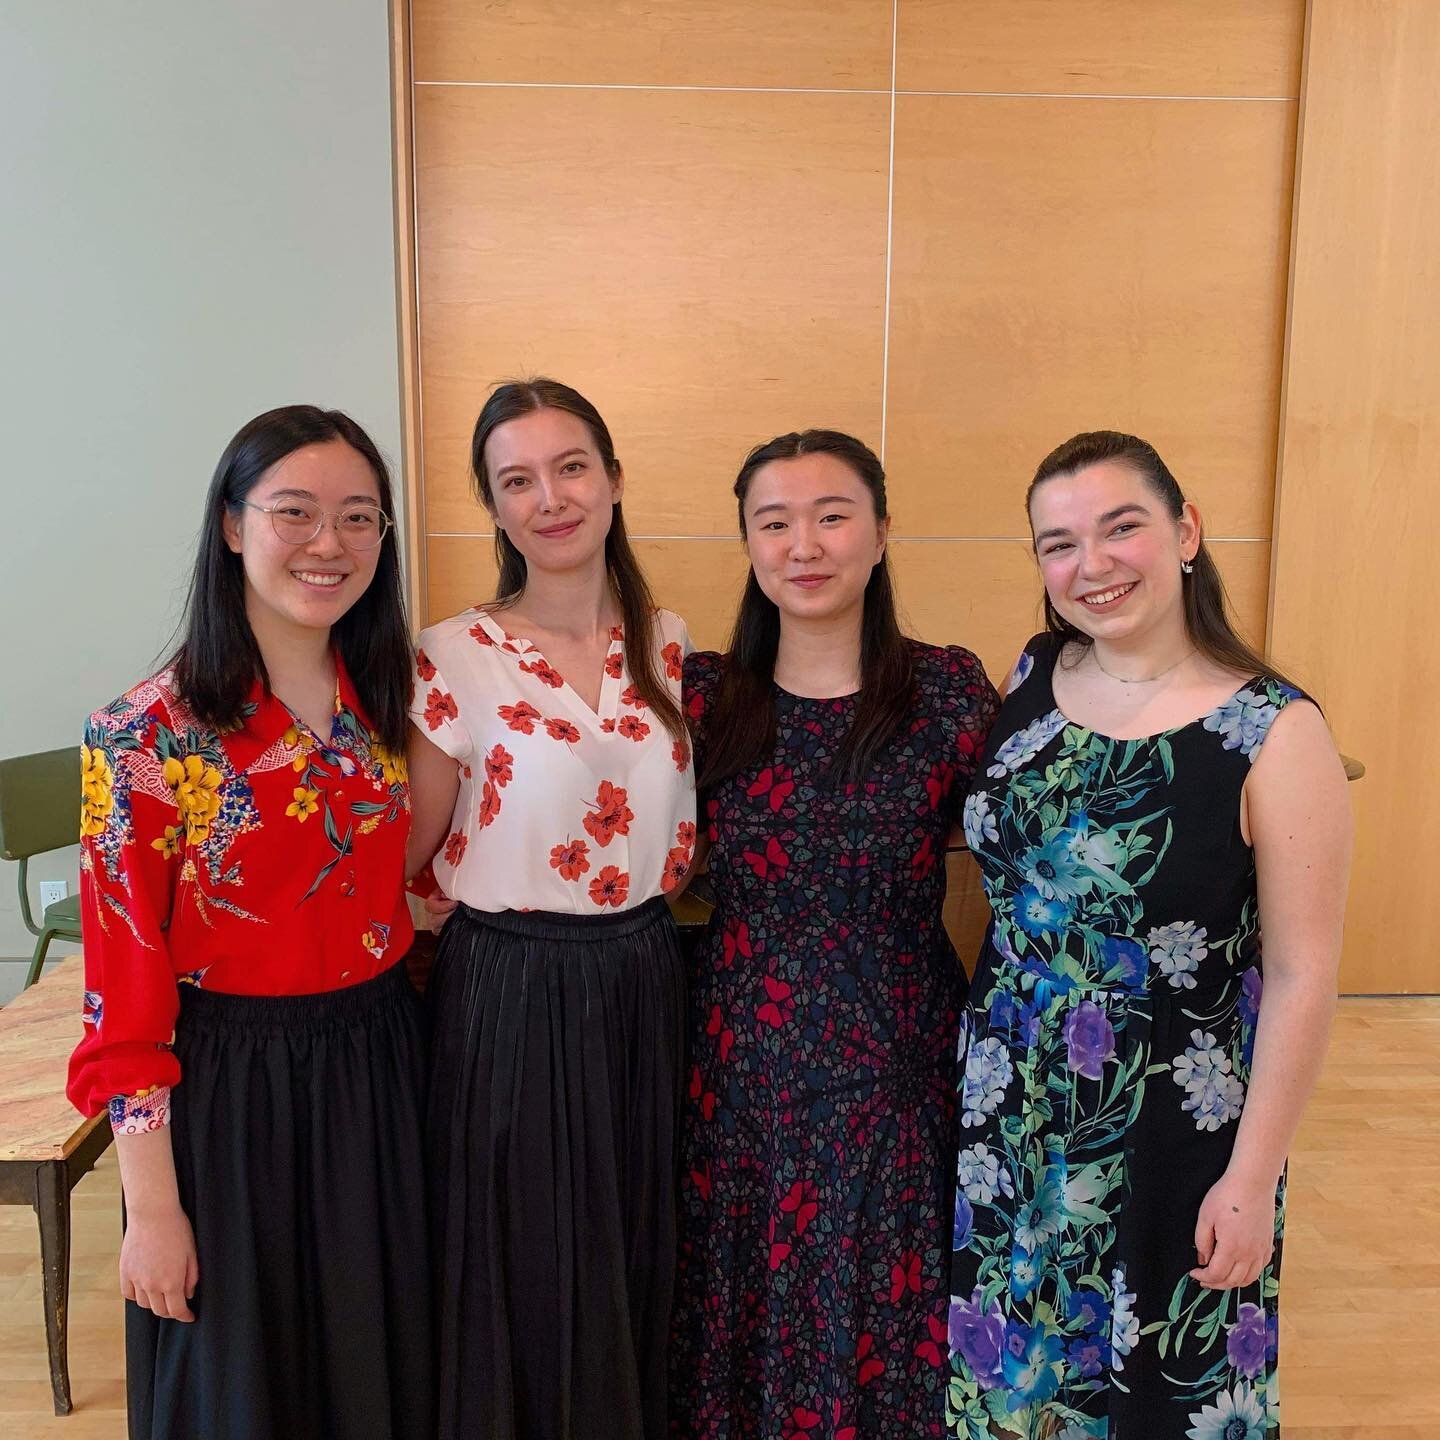 Thank you to everyone who joined us at our season-end recital, Life&rsquo;s Tender Blossoms held at the beautiful @temc.toronto 💐 A special shout-out to collaborators @vyuan02 and @camillemlab for sharing their artistry with us throughout the curati